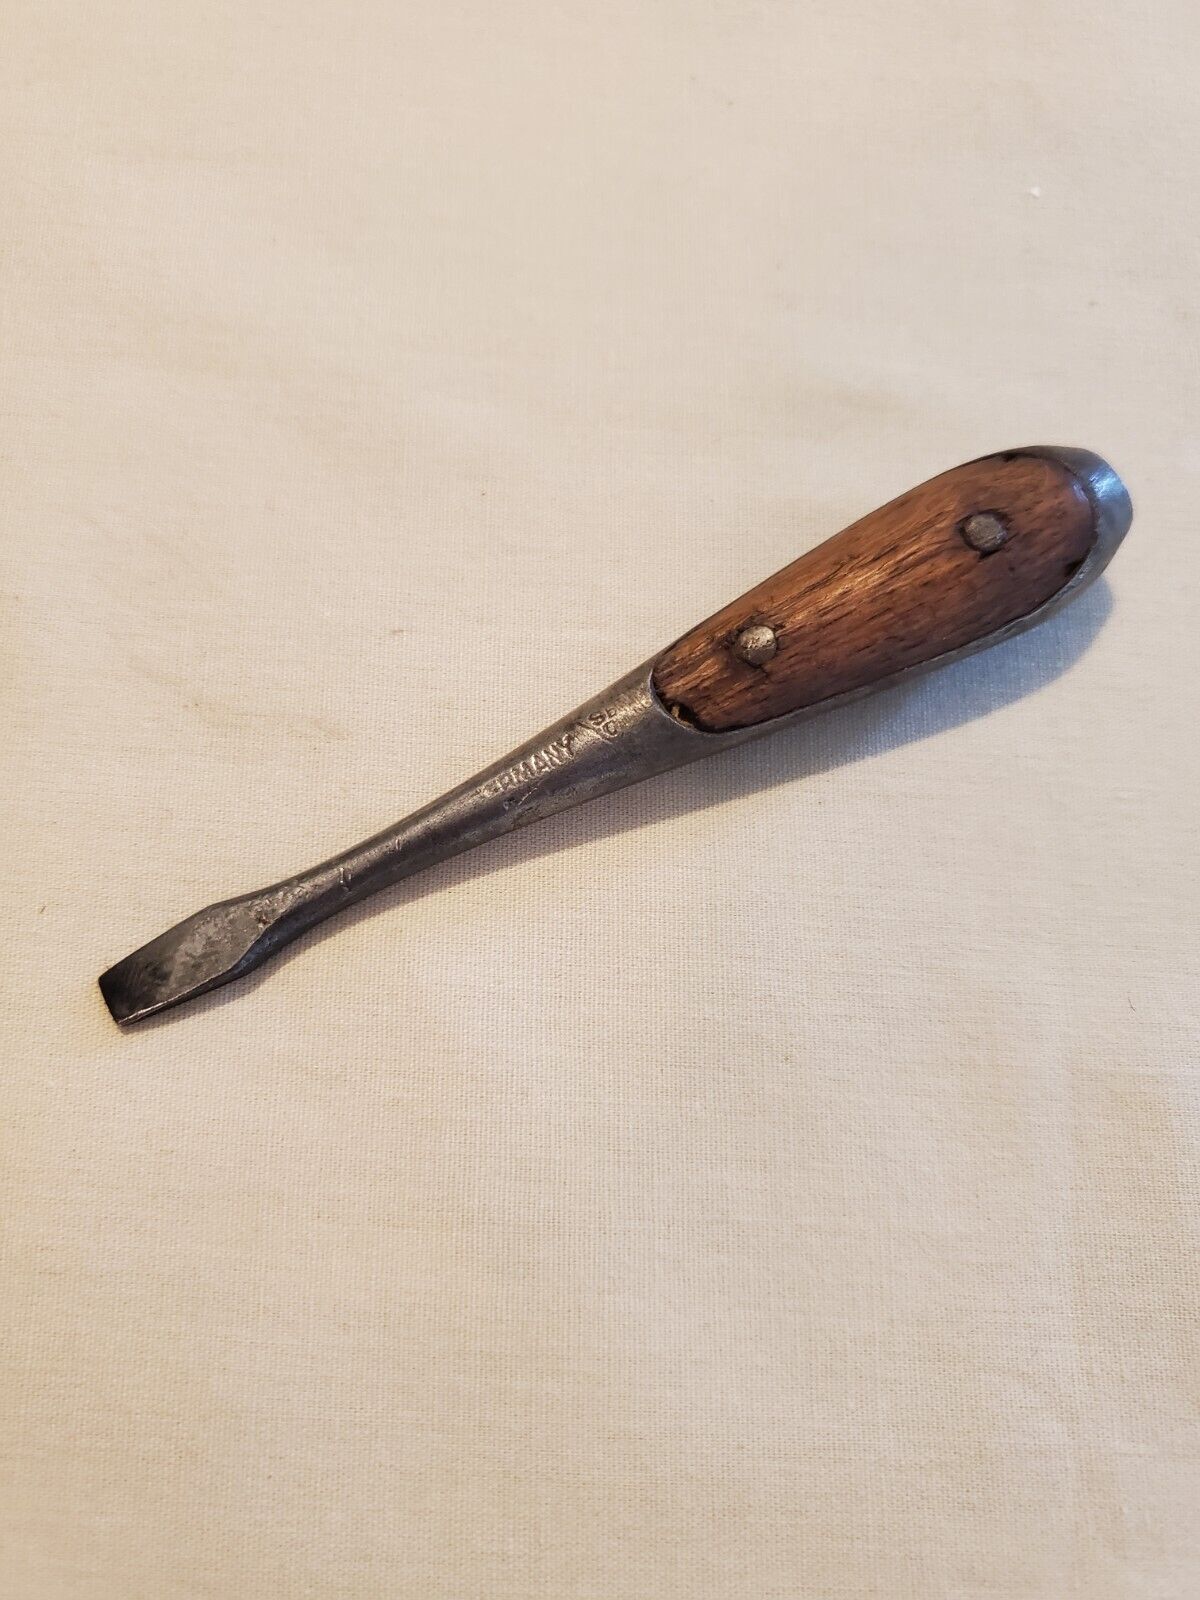 Small Antique German Wood Handle Screwdriver   3 3/4 in.